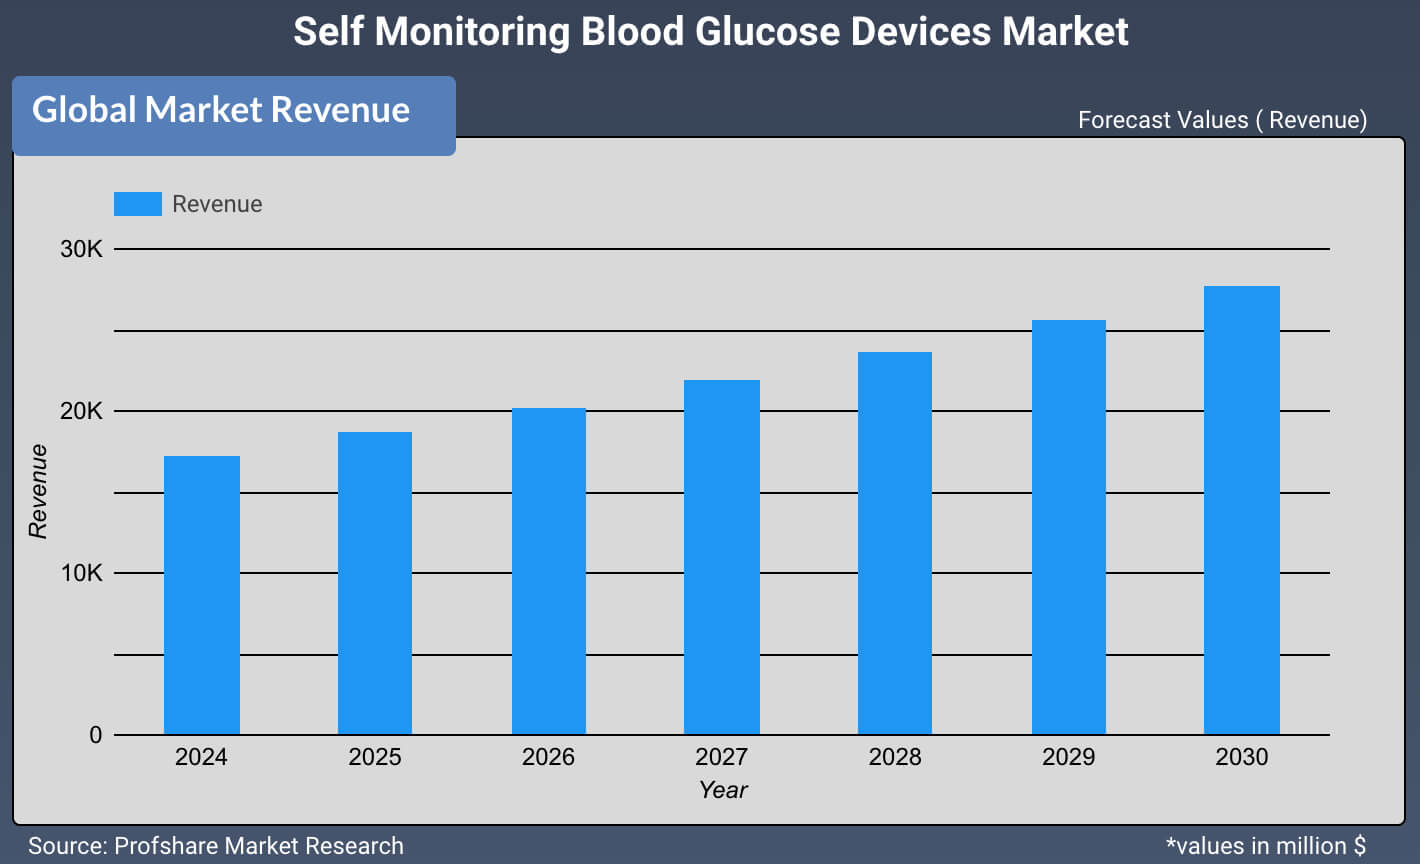 Self Monitoring Blood Glucose Devices Market